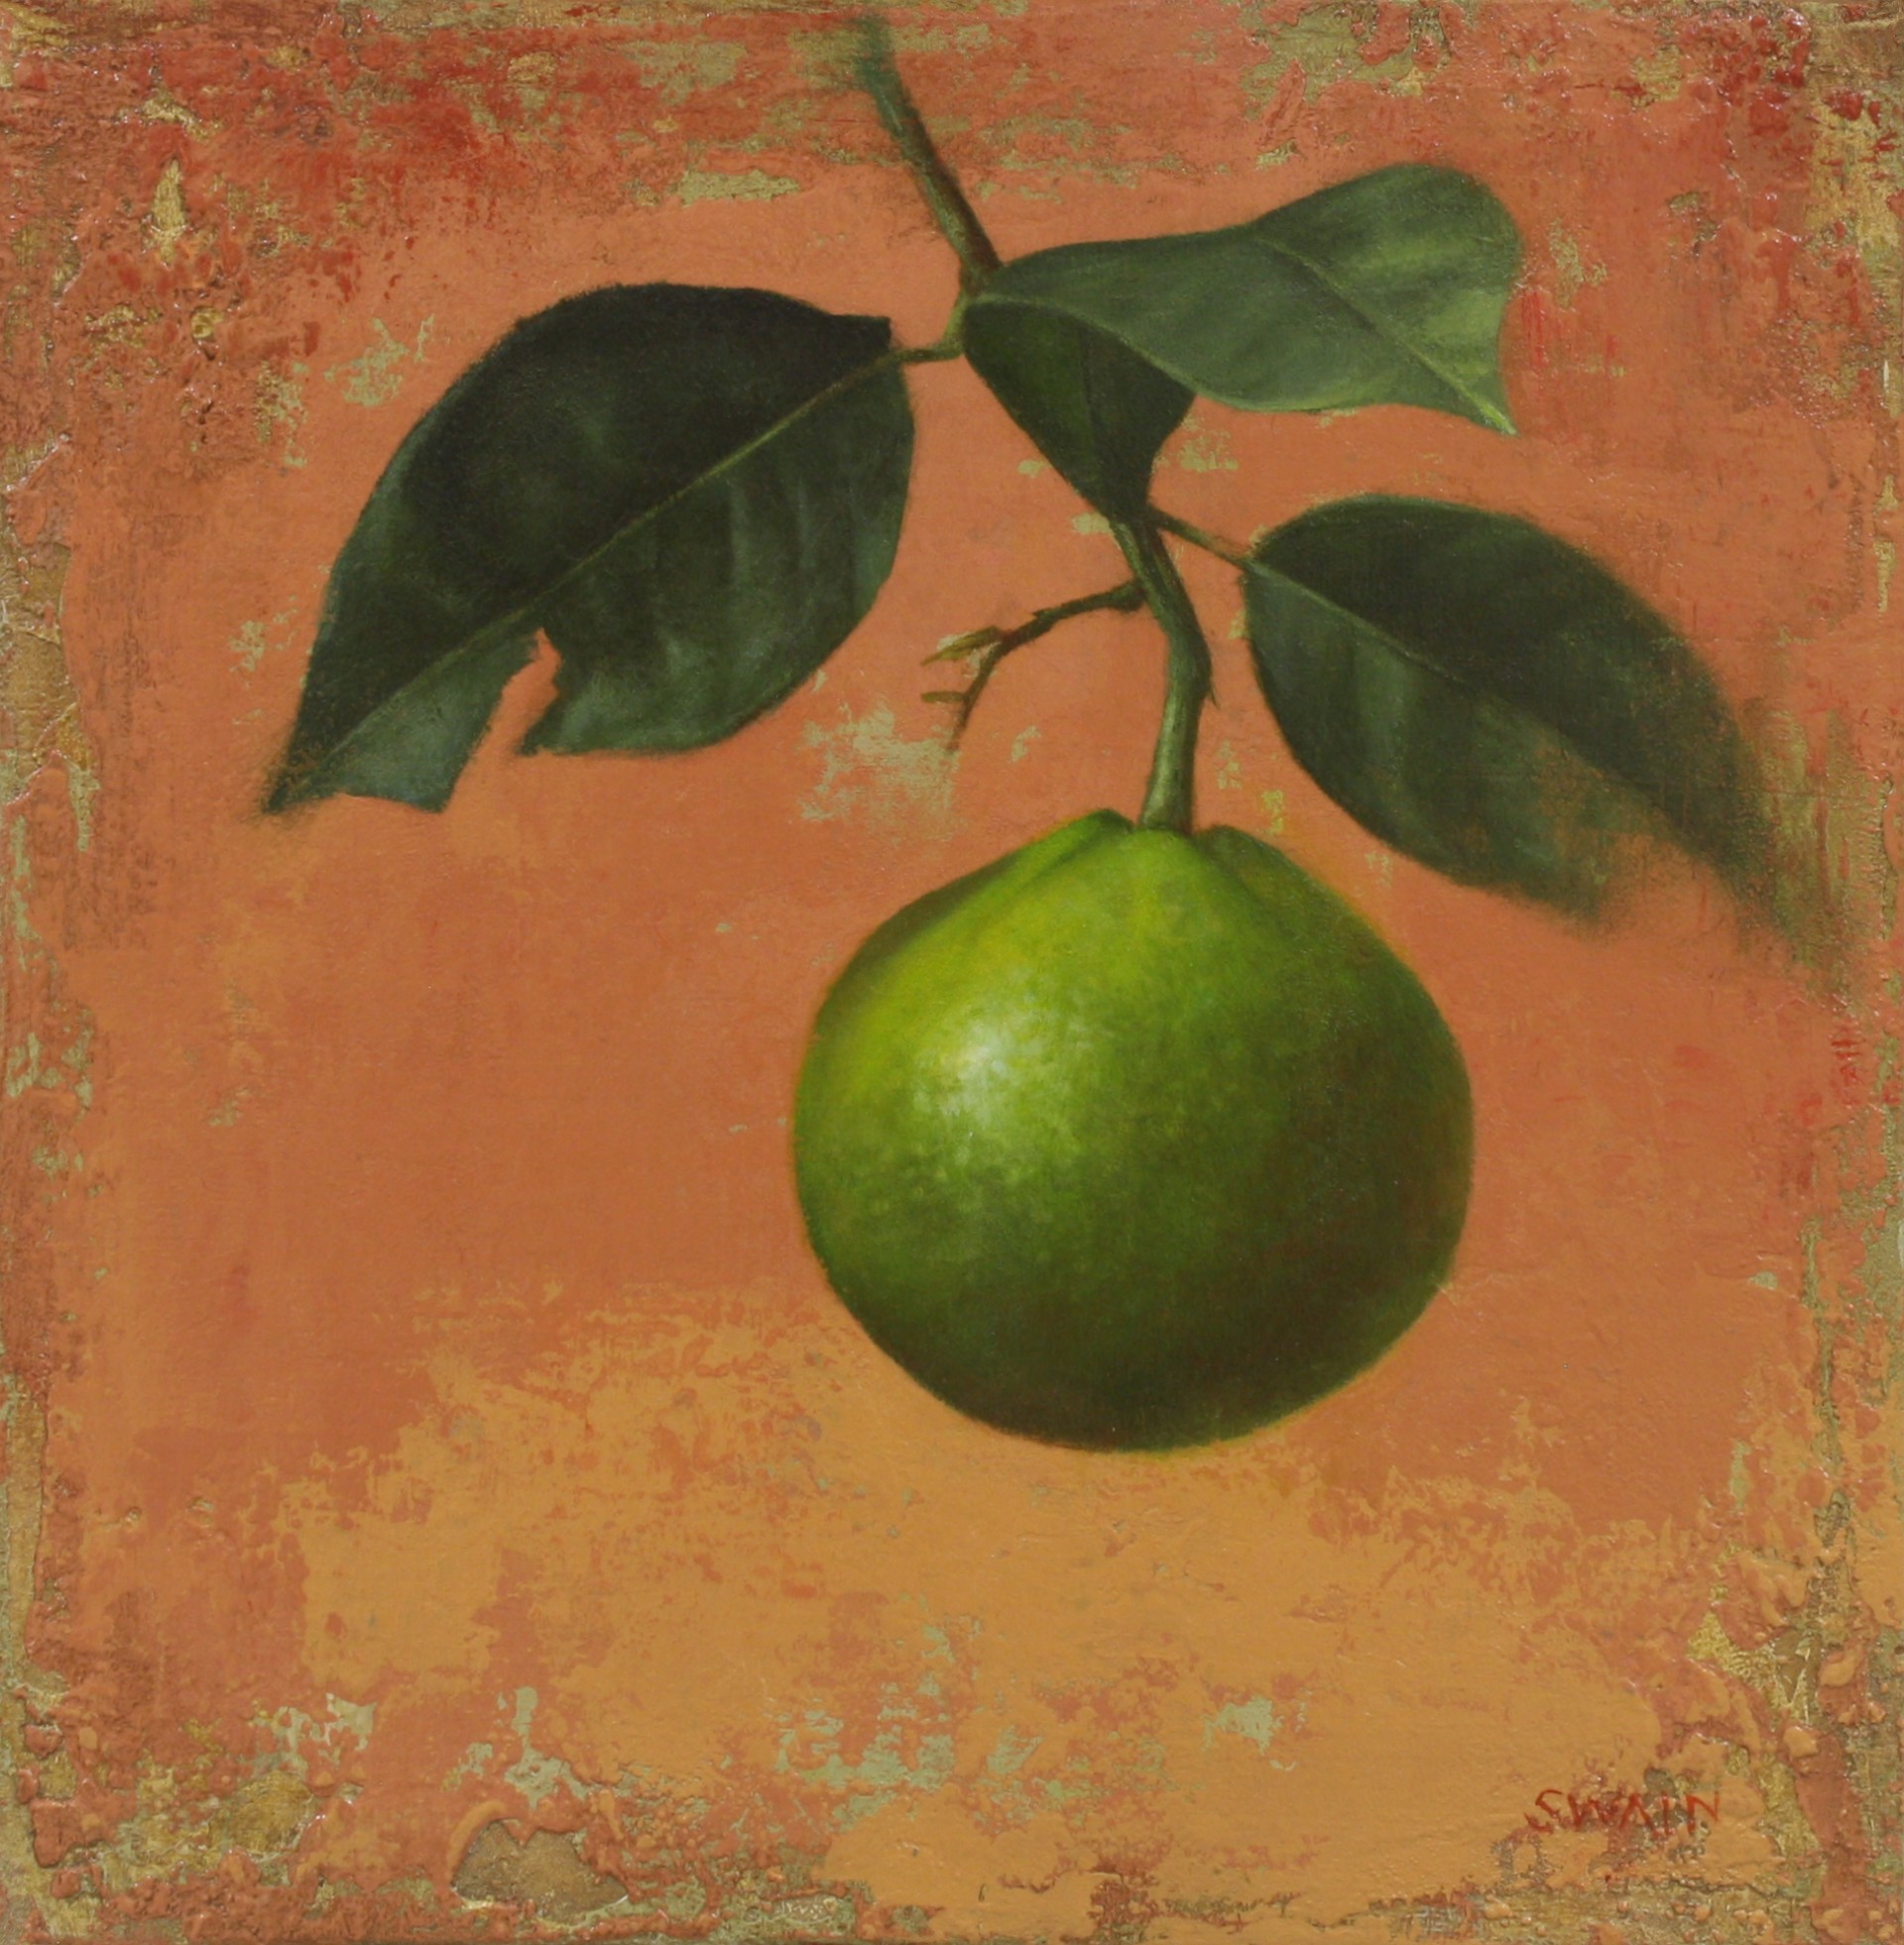 Hanging Lime by Tyler Swain